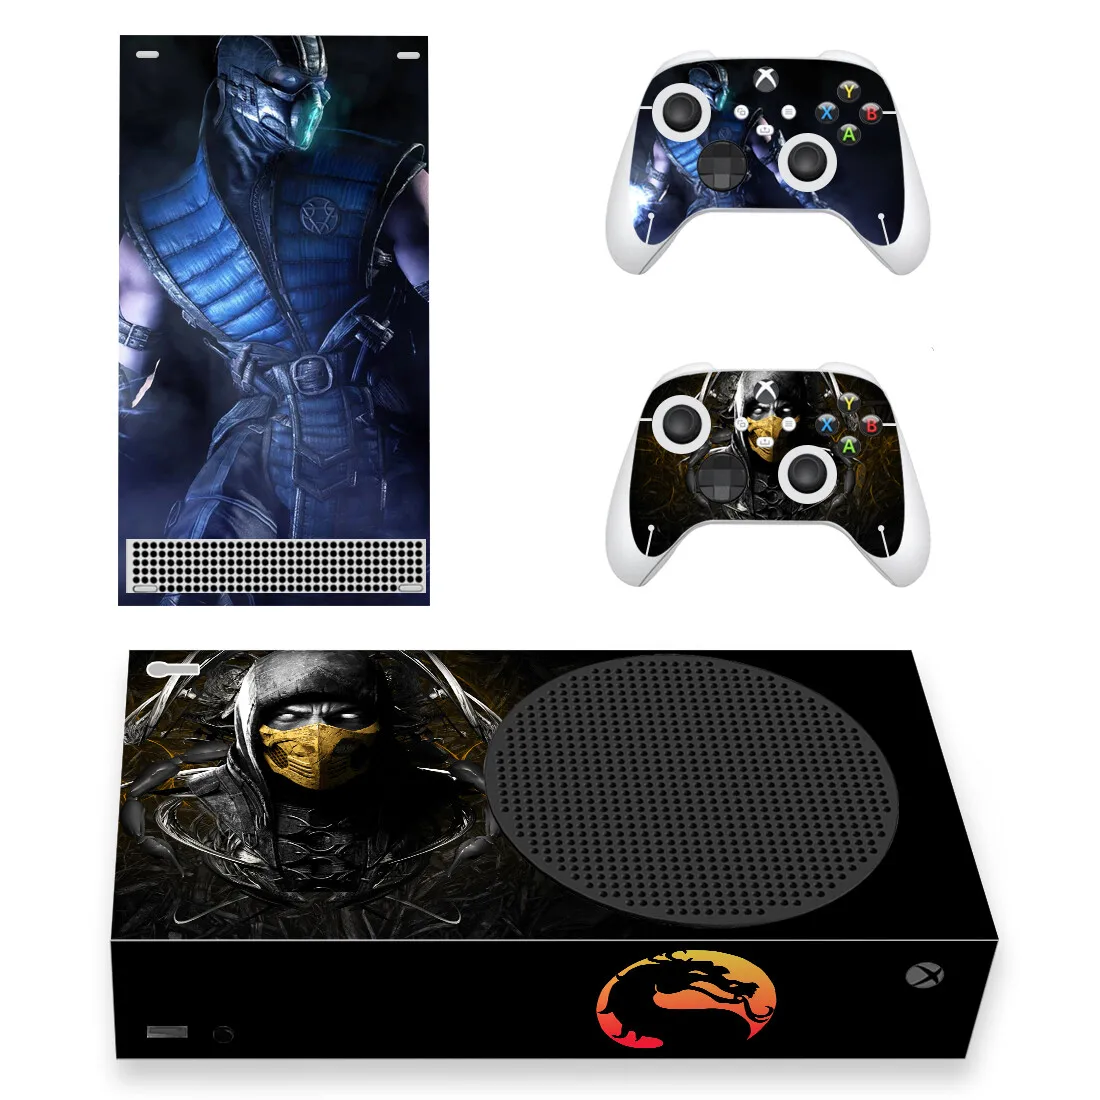 

MORTAL KOMBAT Design For Xbox Series S Skin Sticker Cover For Xbox series s Console and 2 Controllers